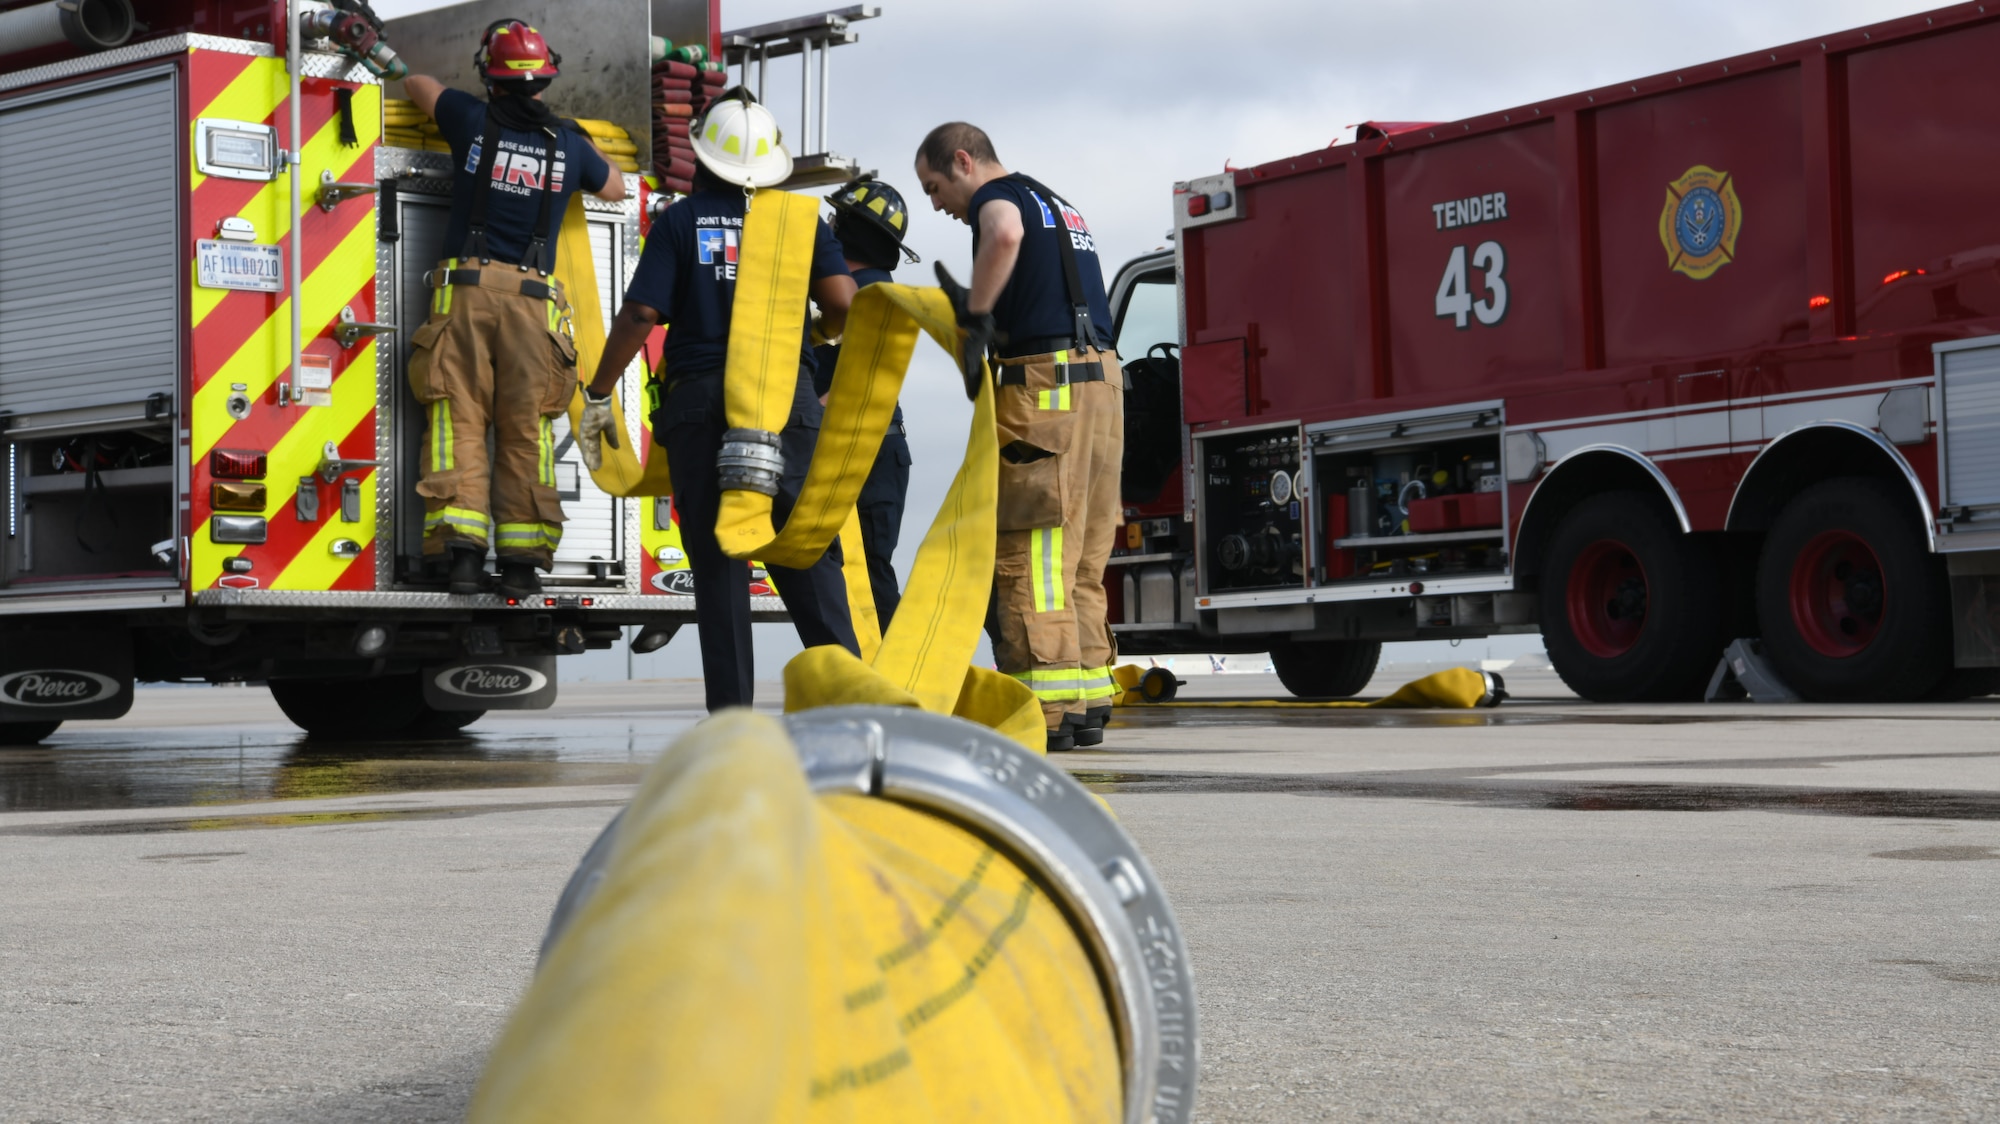 902nd Civil Engineer Squadron firefighters return their equipment to a ready-state following a total force training exercise with the 433rd Airlift Wing Nov. 15, 2021, at Joint Base San Antonio-Lackland, Texas. The firefighters responded to a simulated brake fire on a C-5M Super Galaxy cargo aircraft. (U.S. Air Force photo by Master Sgt. Kristian Carter)